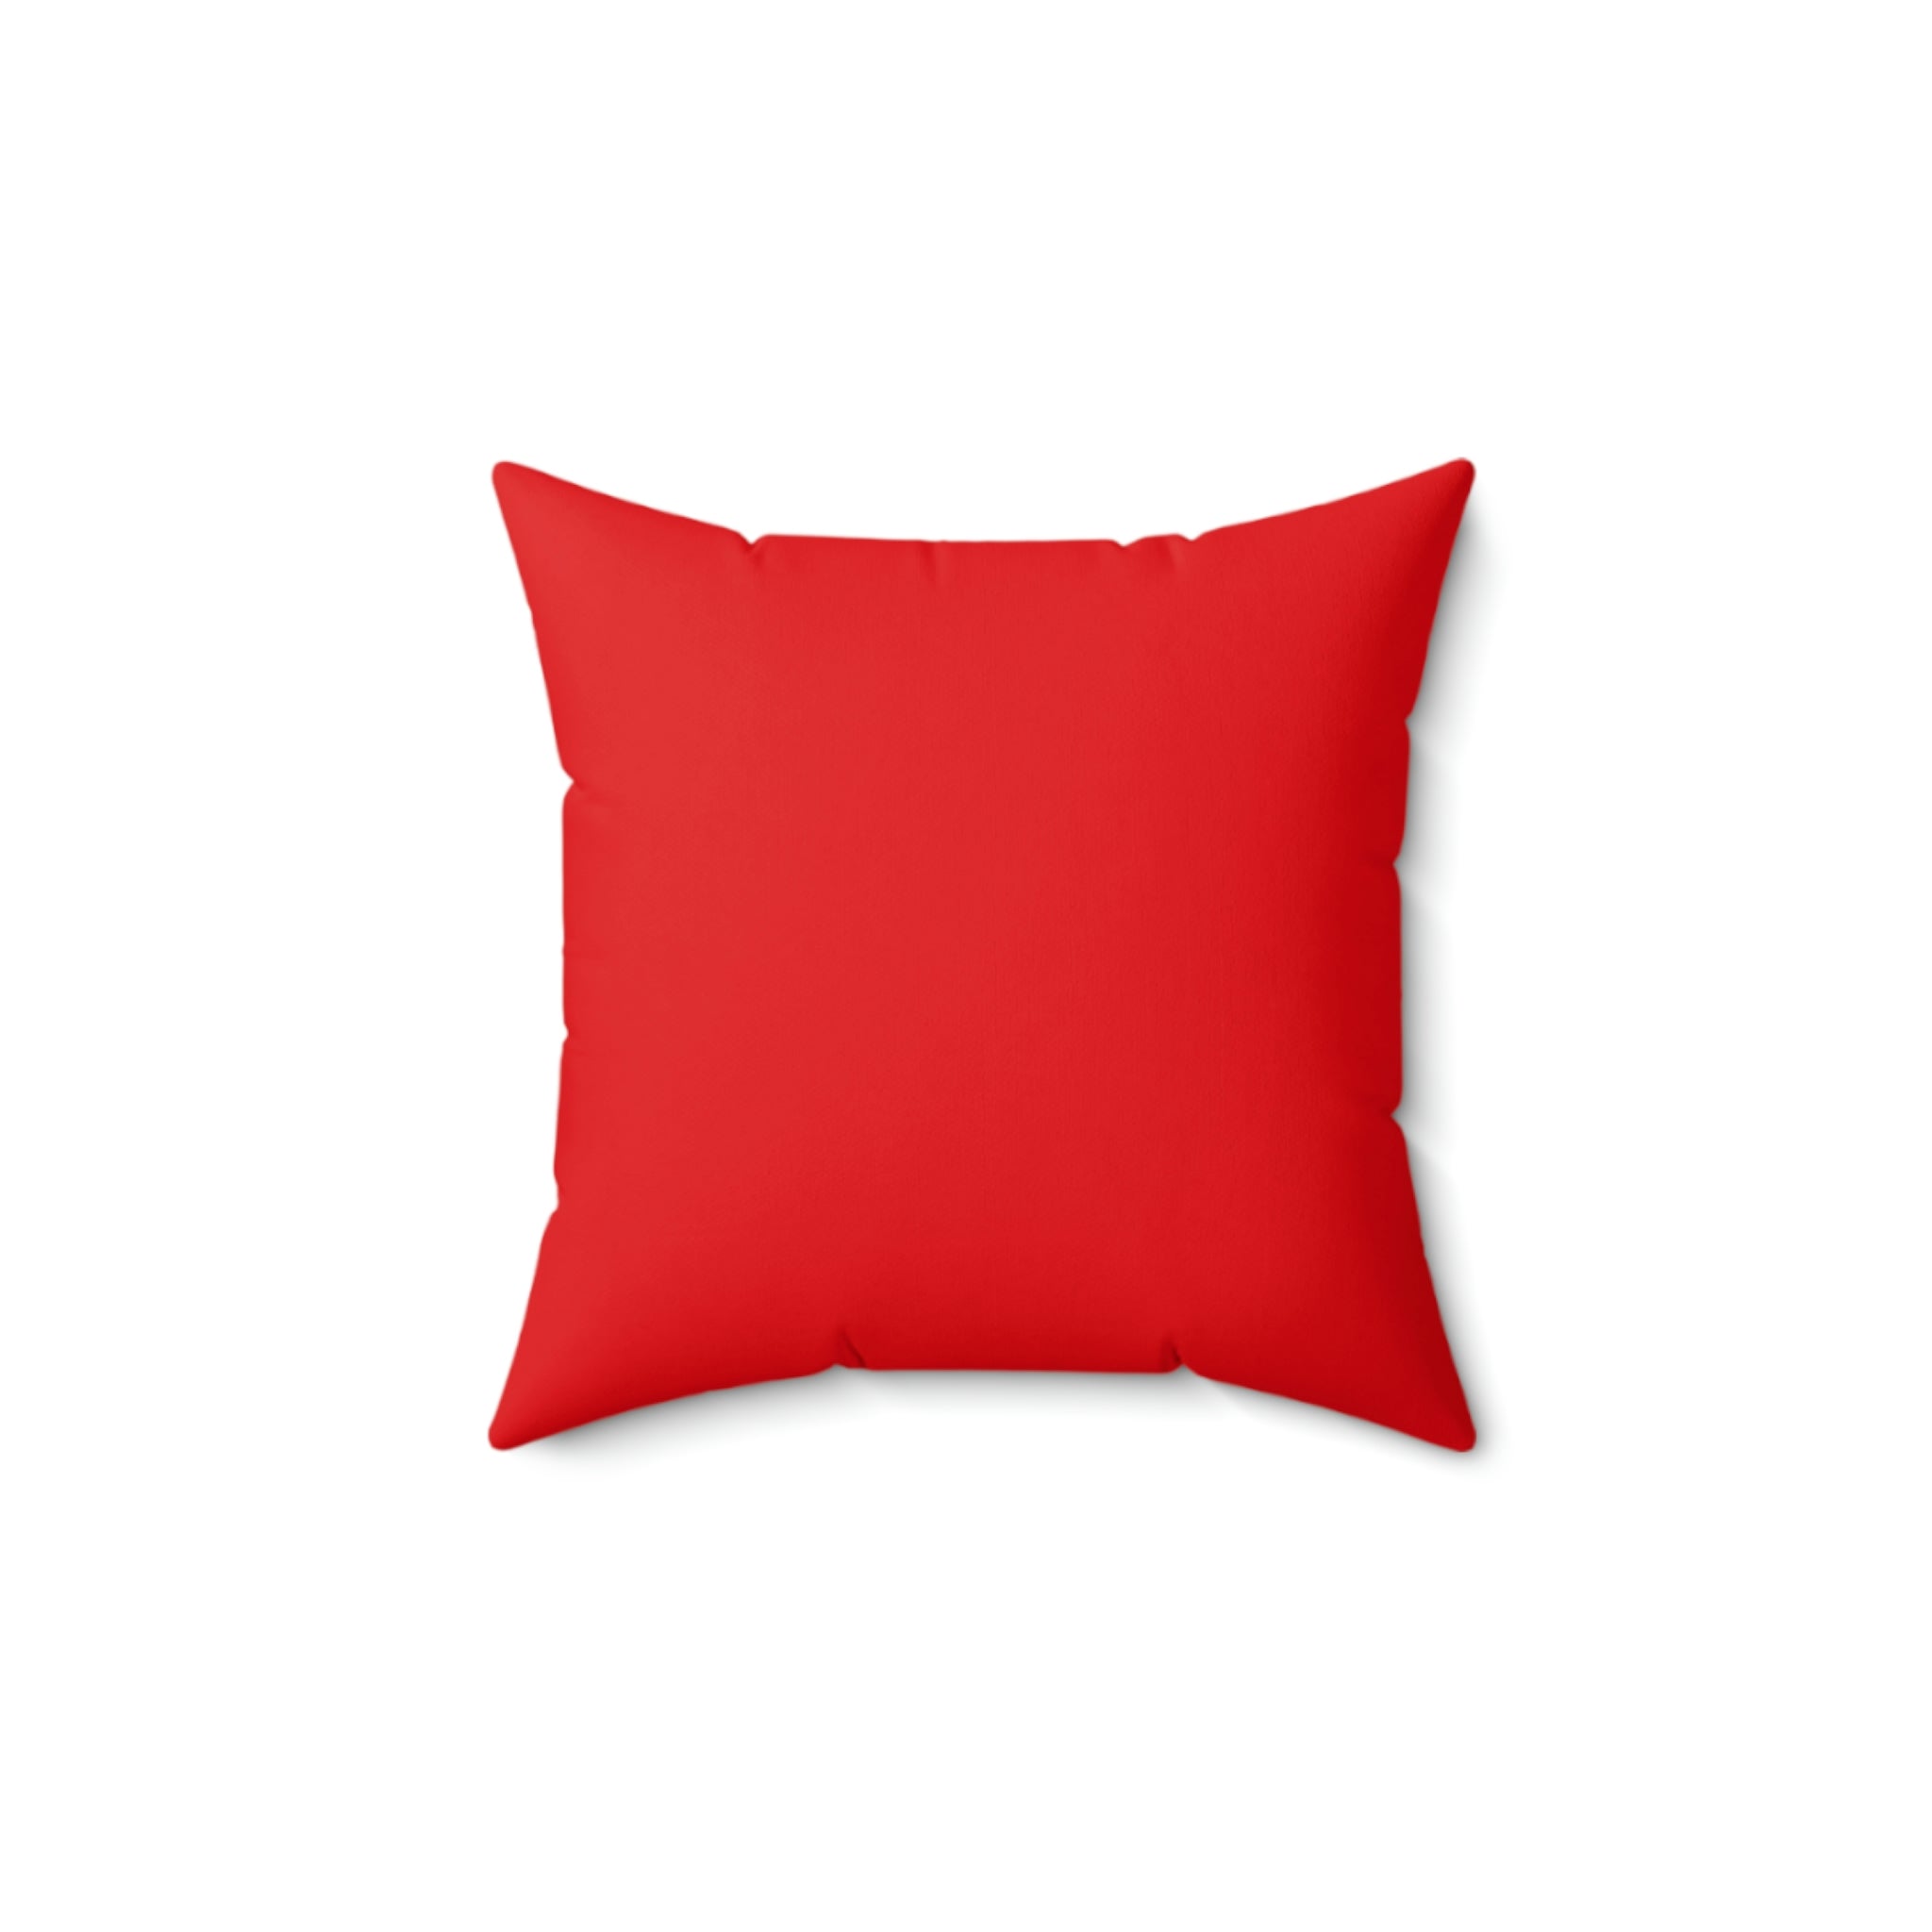 Love Spun Polyester Pillow Heart with wings pattern